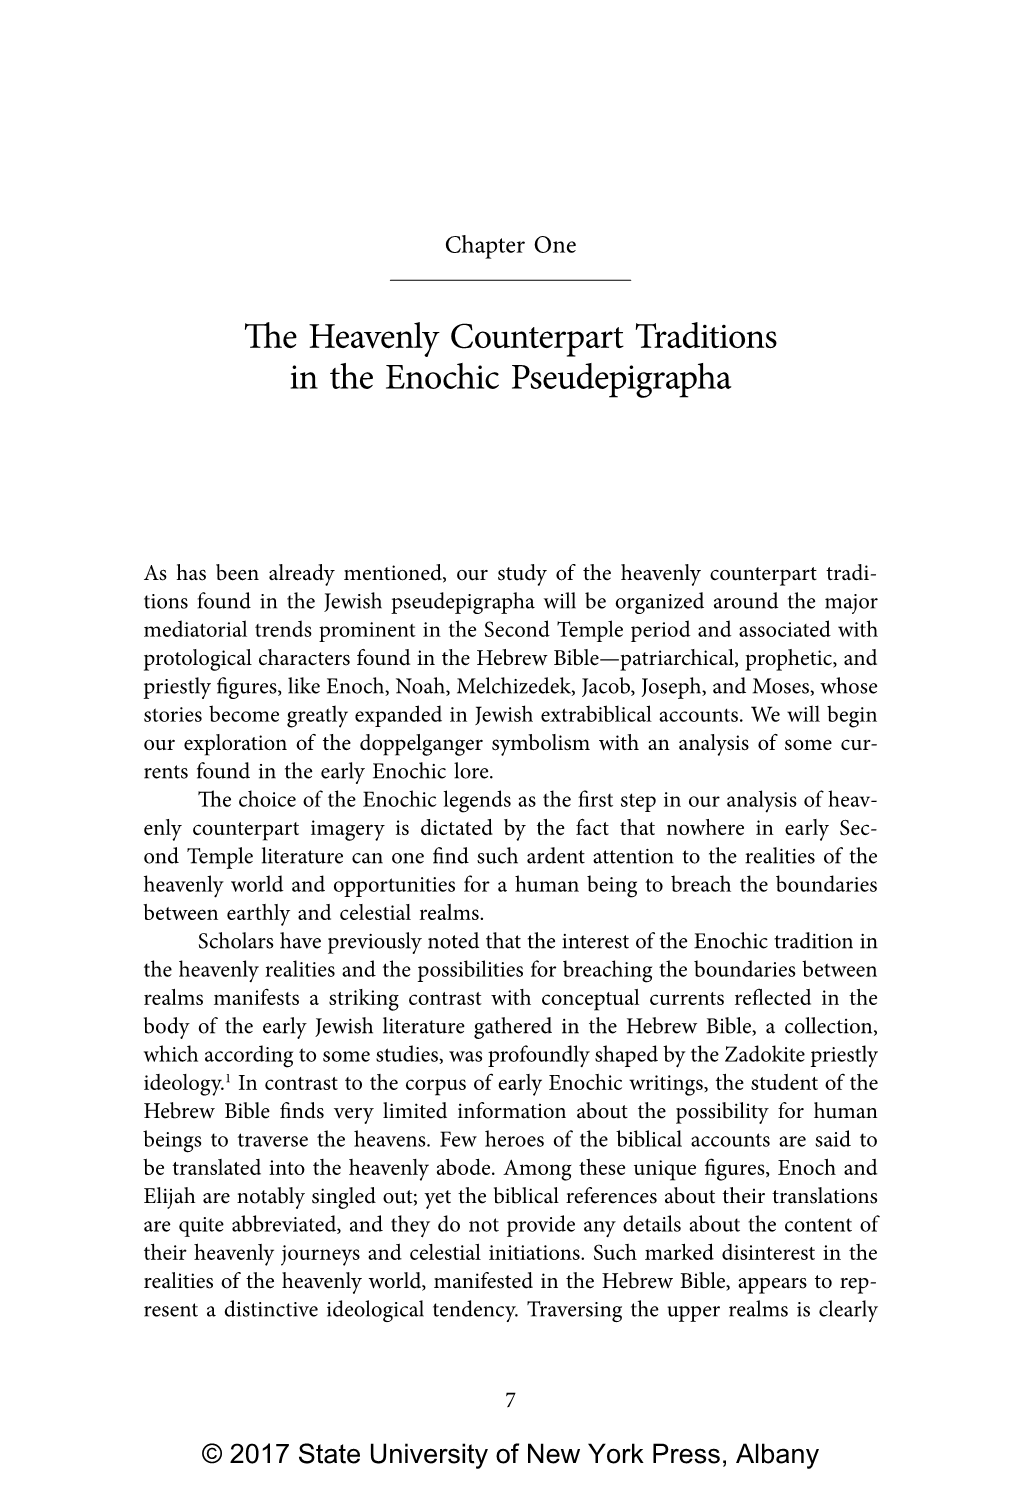 The Heavenly Counterpart Traditions in the Enochic Pseudepigrapha